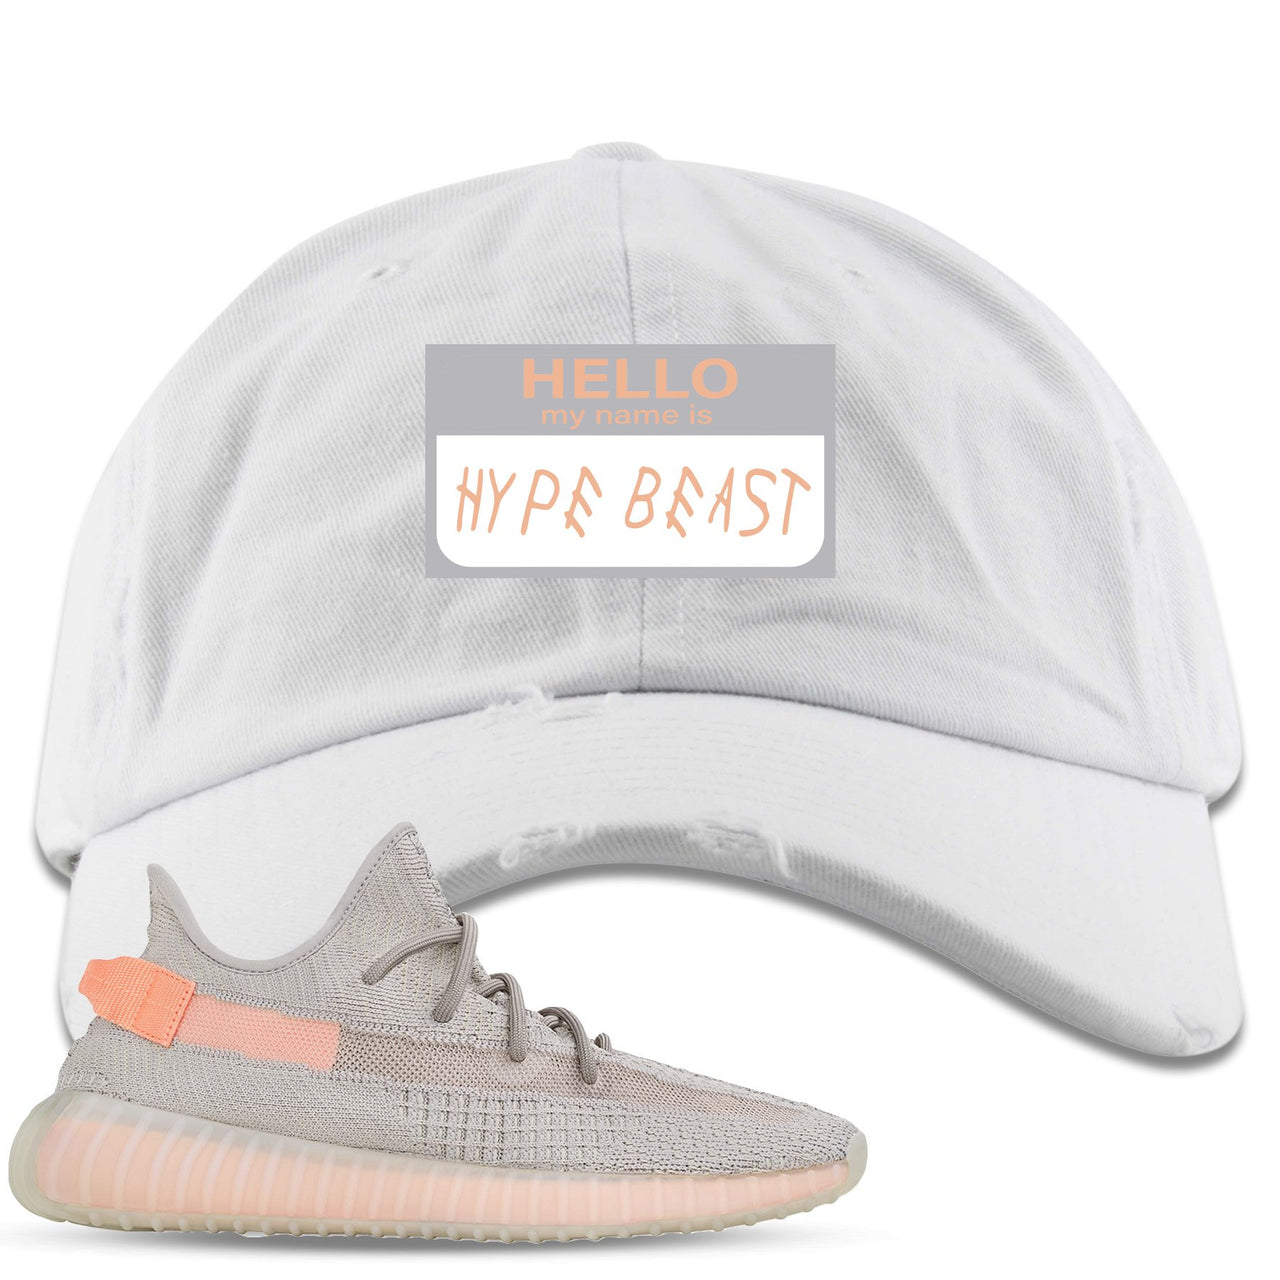 True Form v2 350s Distressed Dad Hat | Hello My Name Is Hype Beast Woe, White